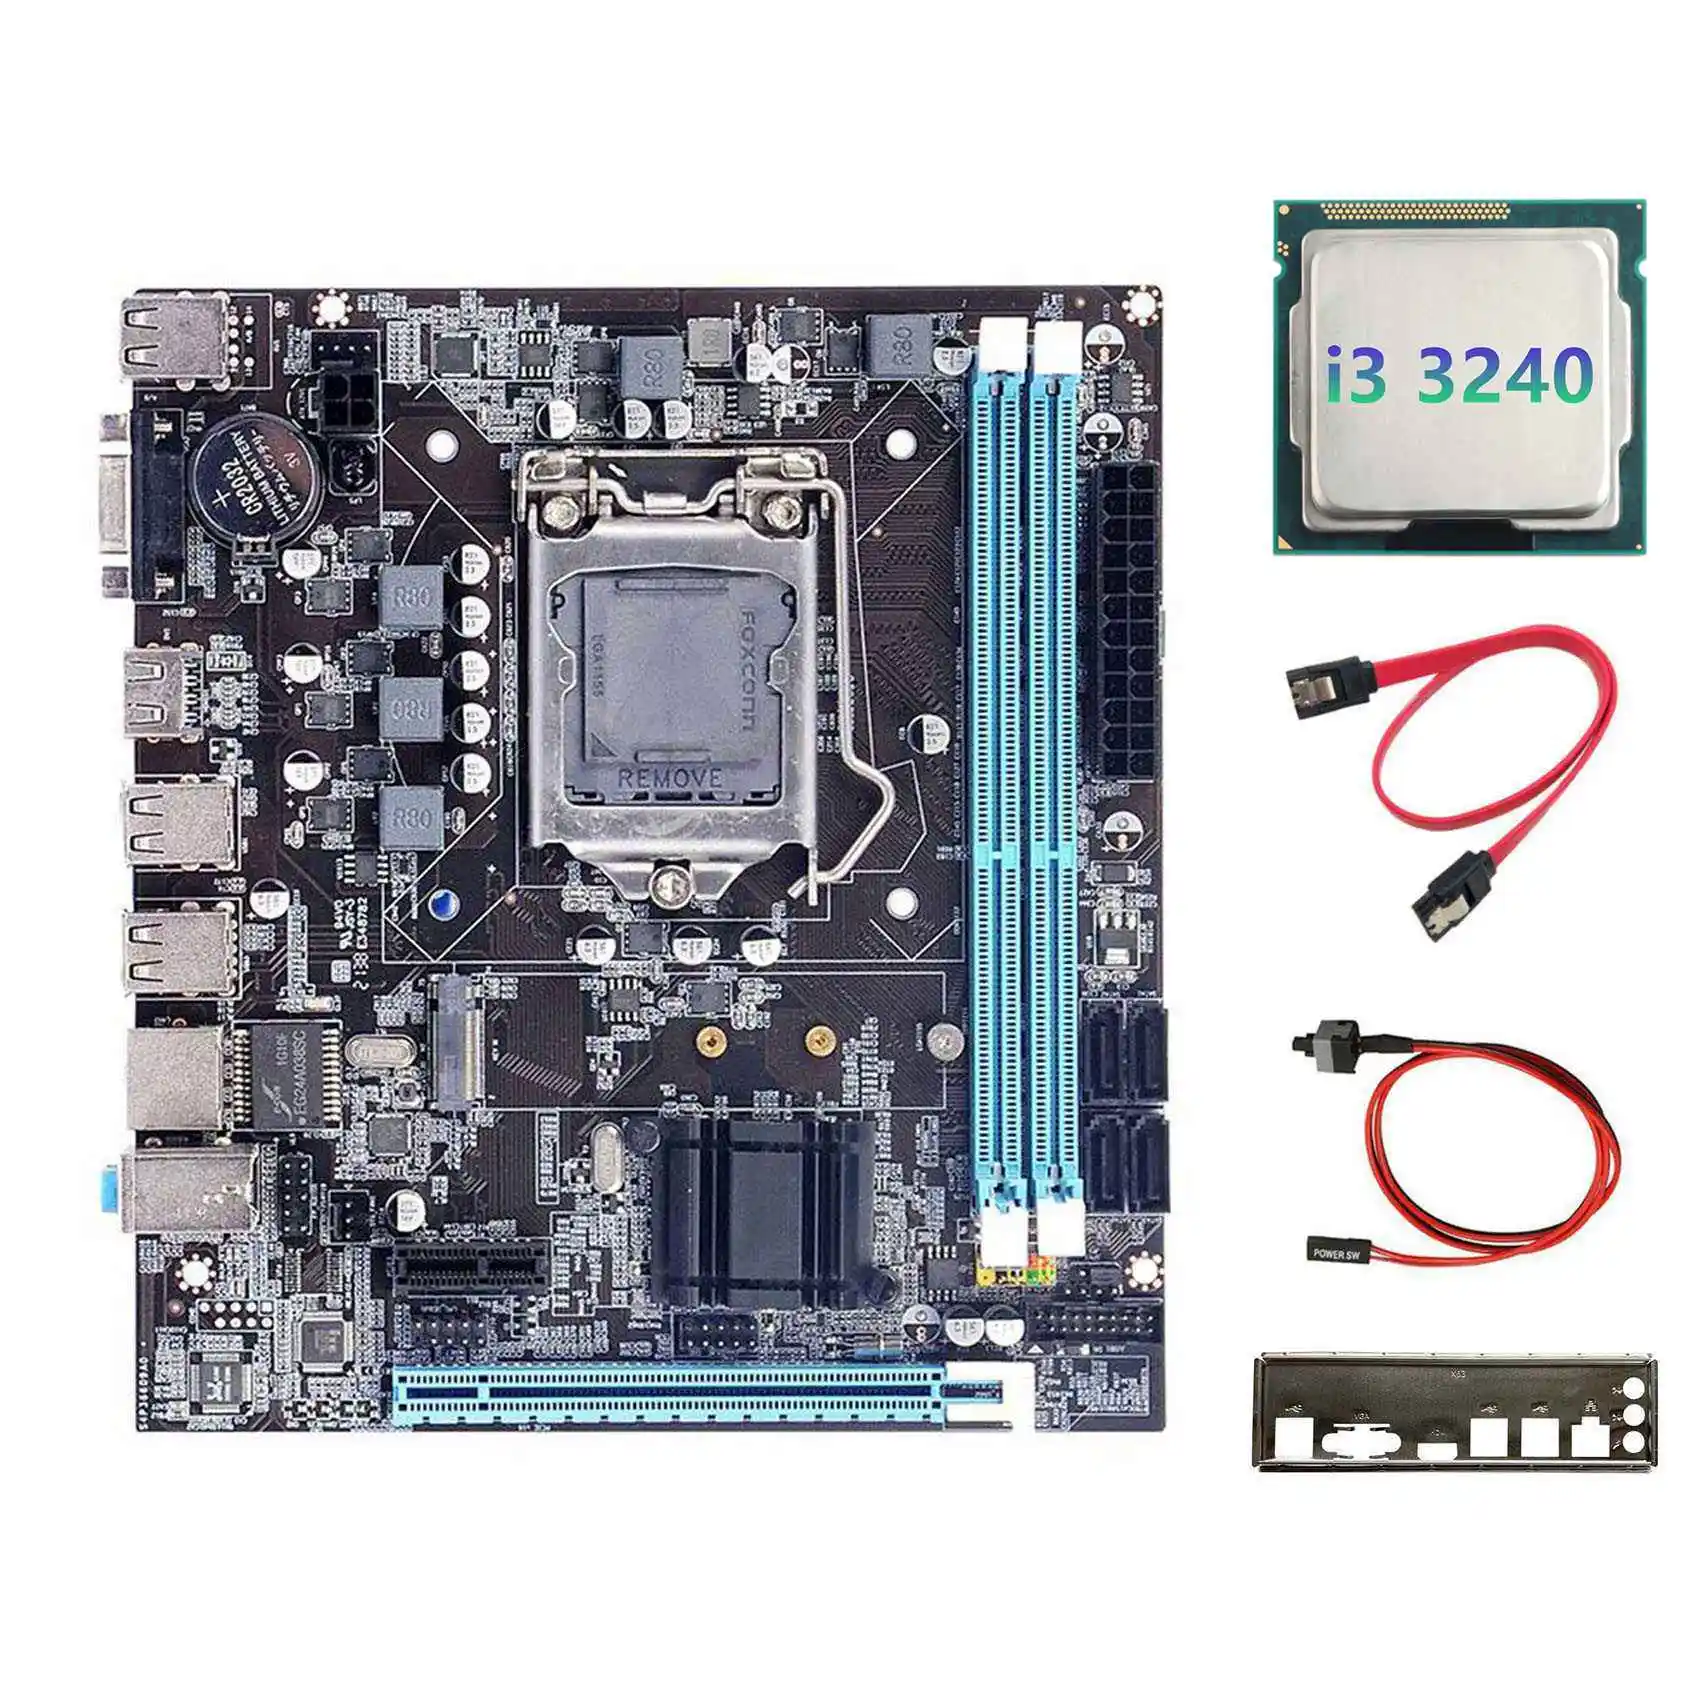 

H61 Motherboard+I3 3240 CPU+SATA Cable+Switch Cable+Baffle LGA1155 M.2 NVME DDR3 for Office for PUBG CF LOL Motherboard